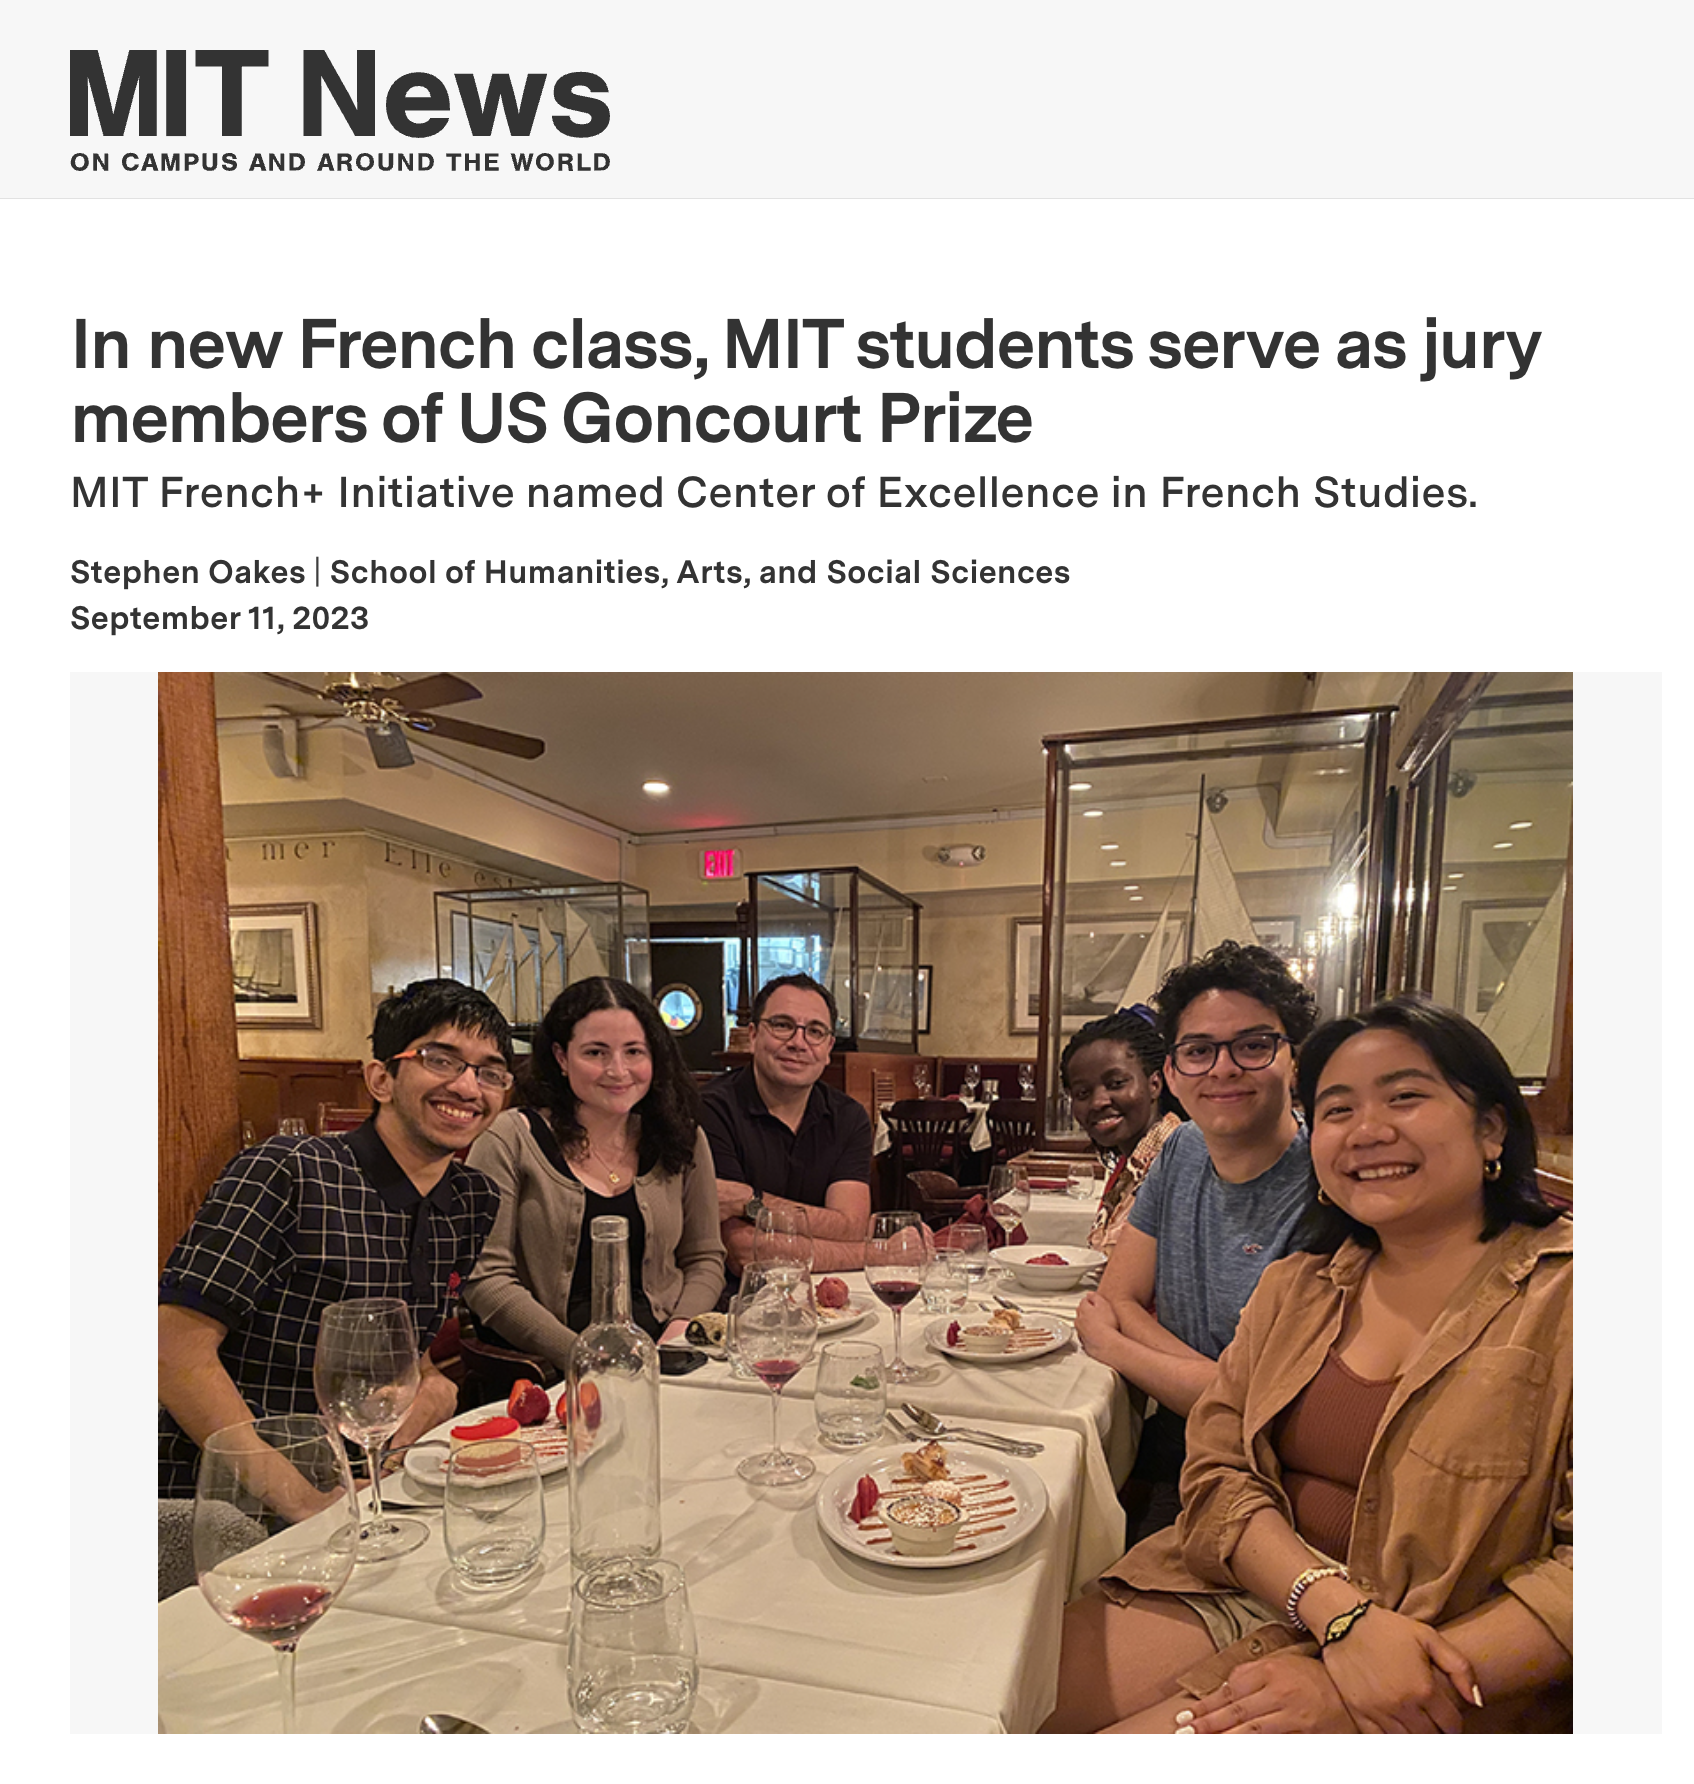 In new French class with Prof Bruno Perreau, MIT students serve as jury members of US Goncourt Prize